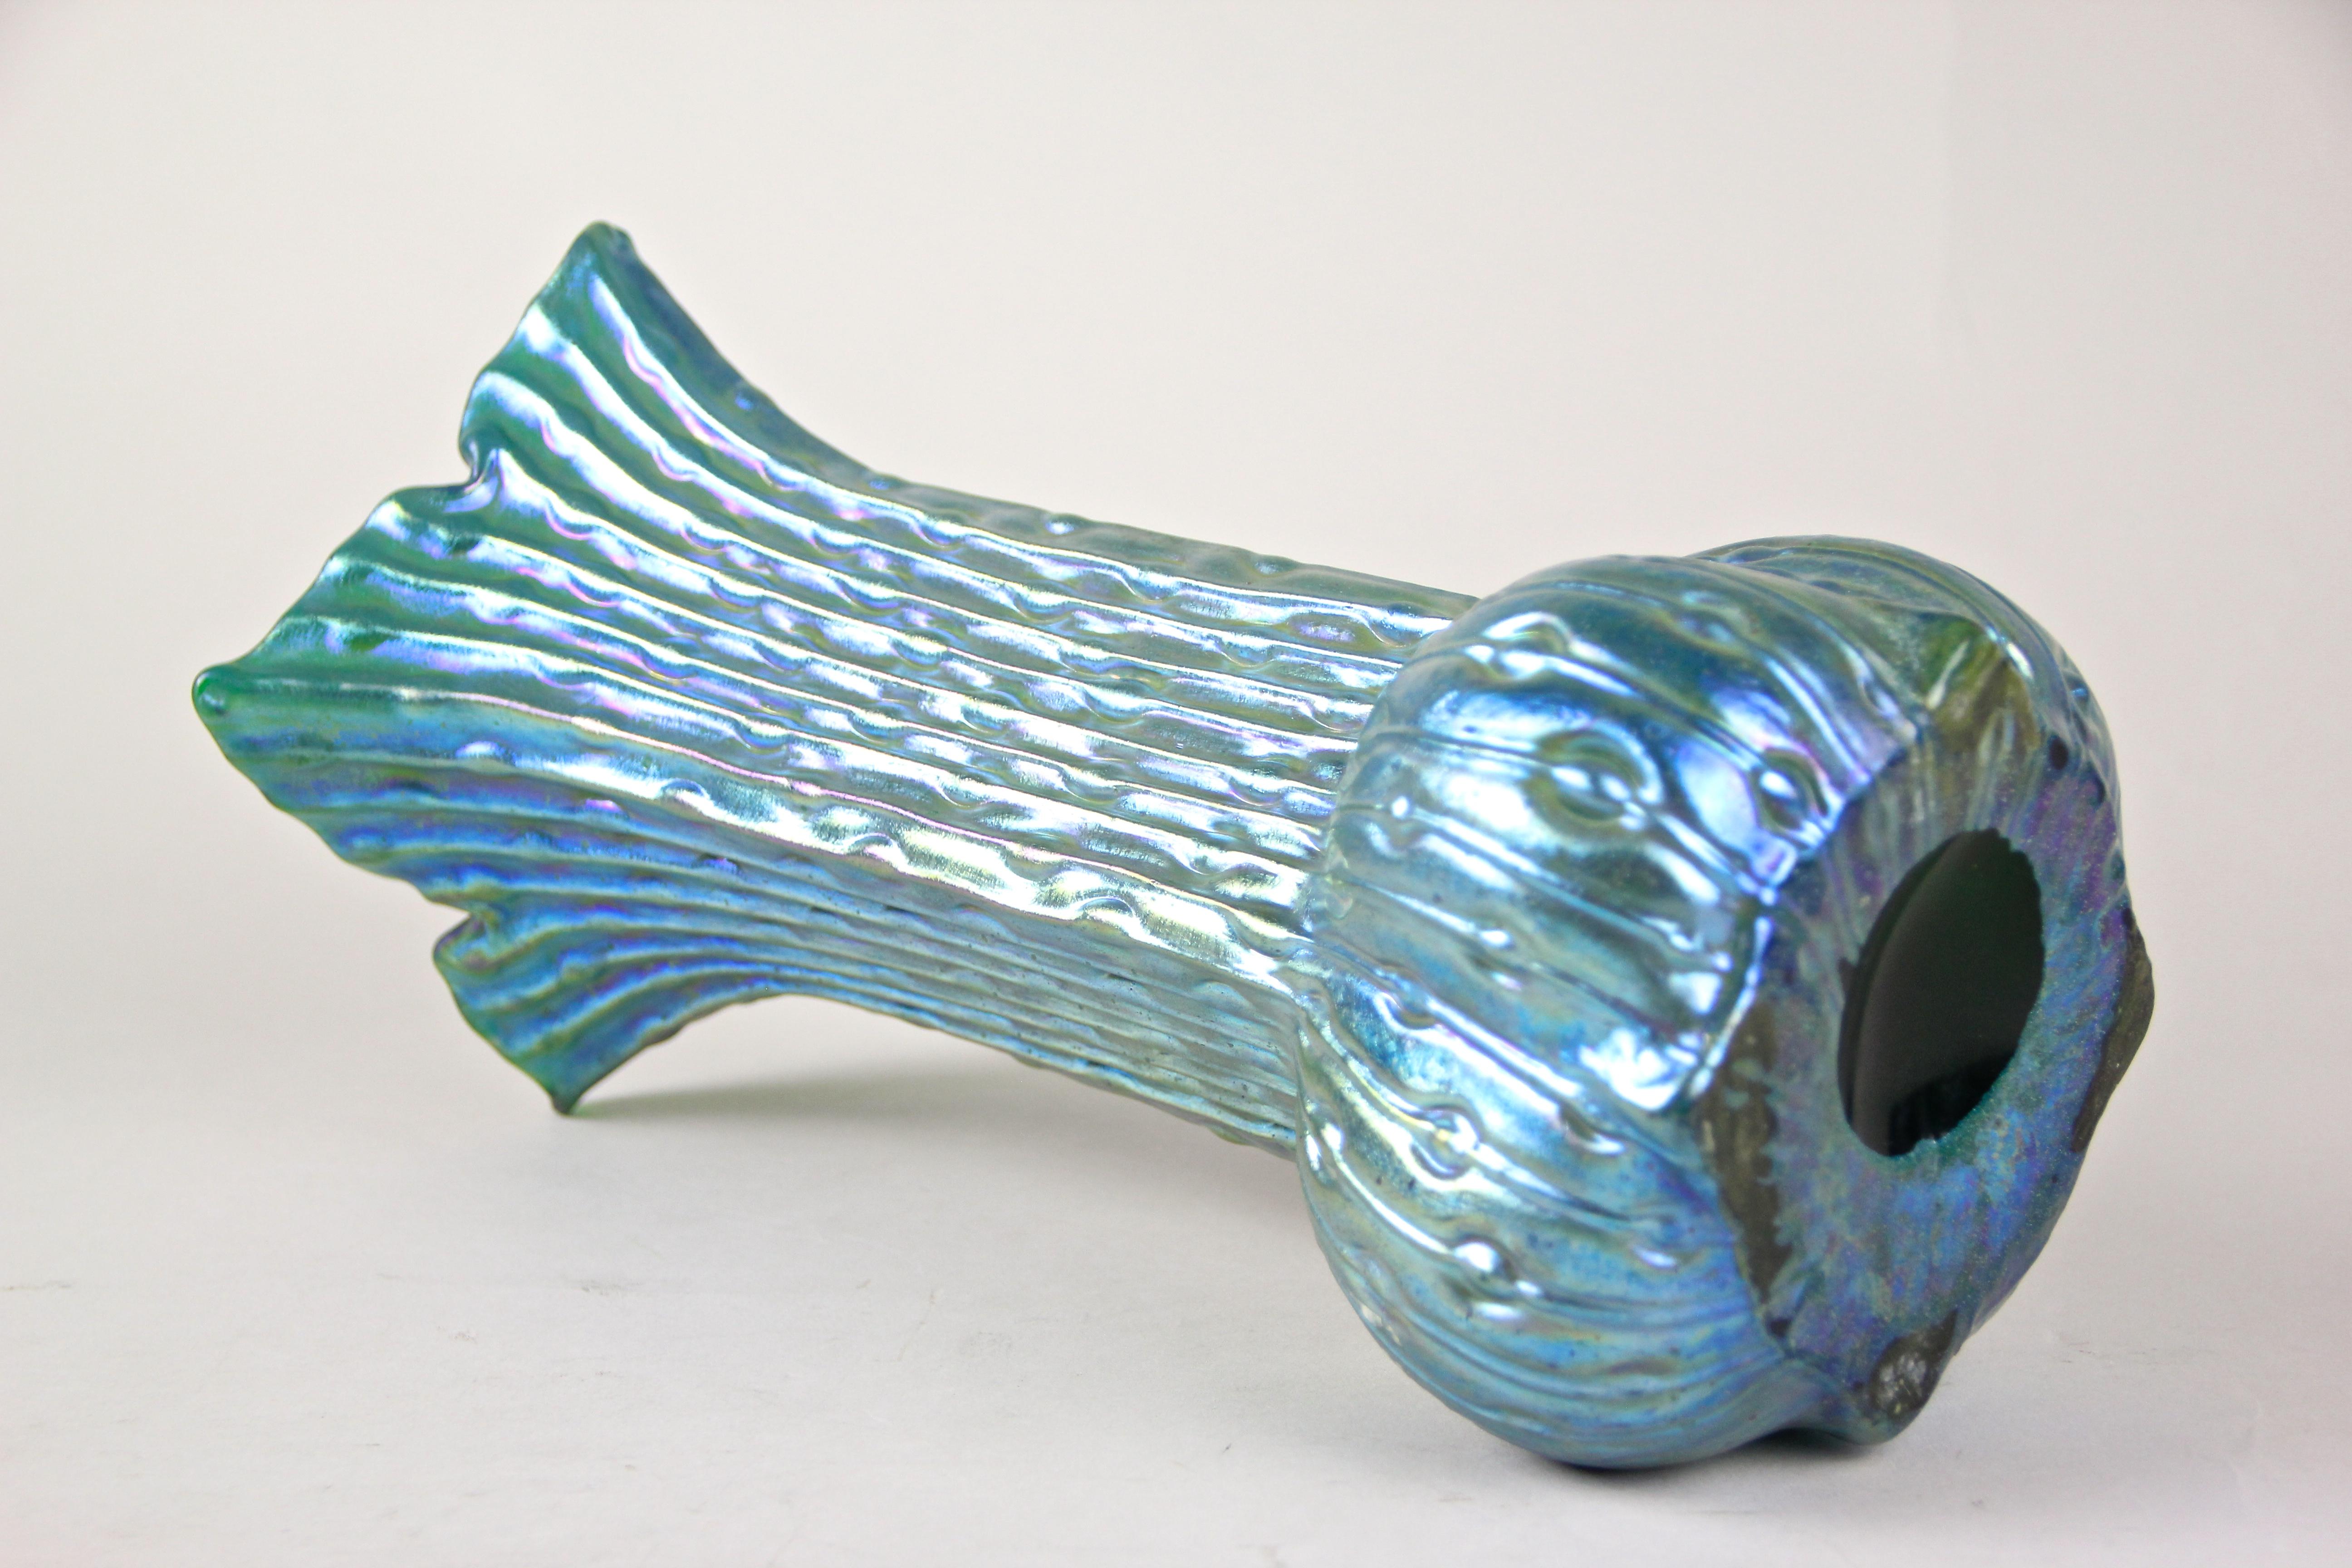 Iriscident Art Nouveau Glass Vase By Loetz Witwe Bohemia Circa 1902 For Sale At 1stdibs